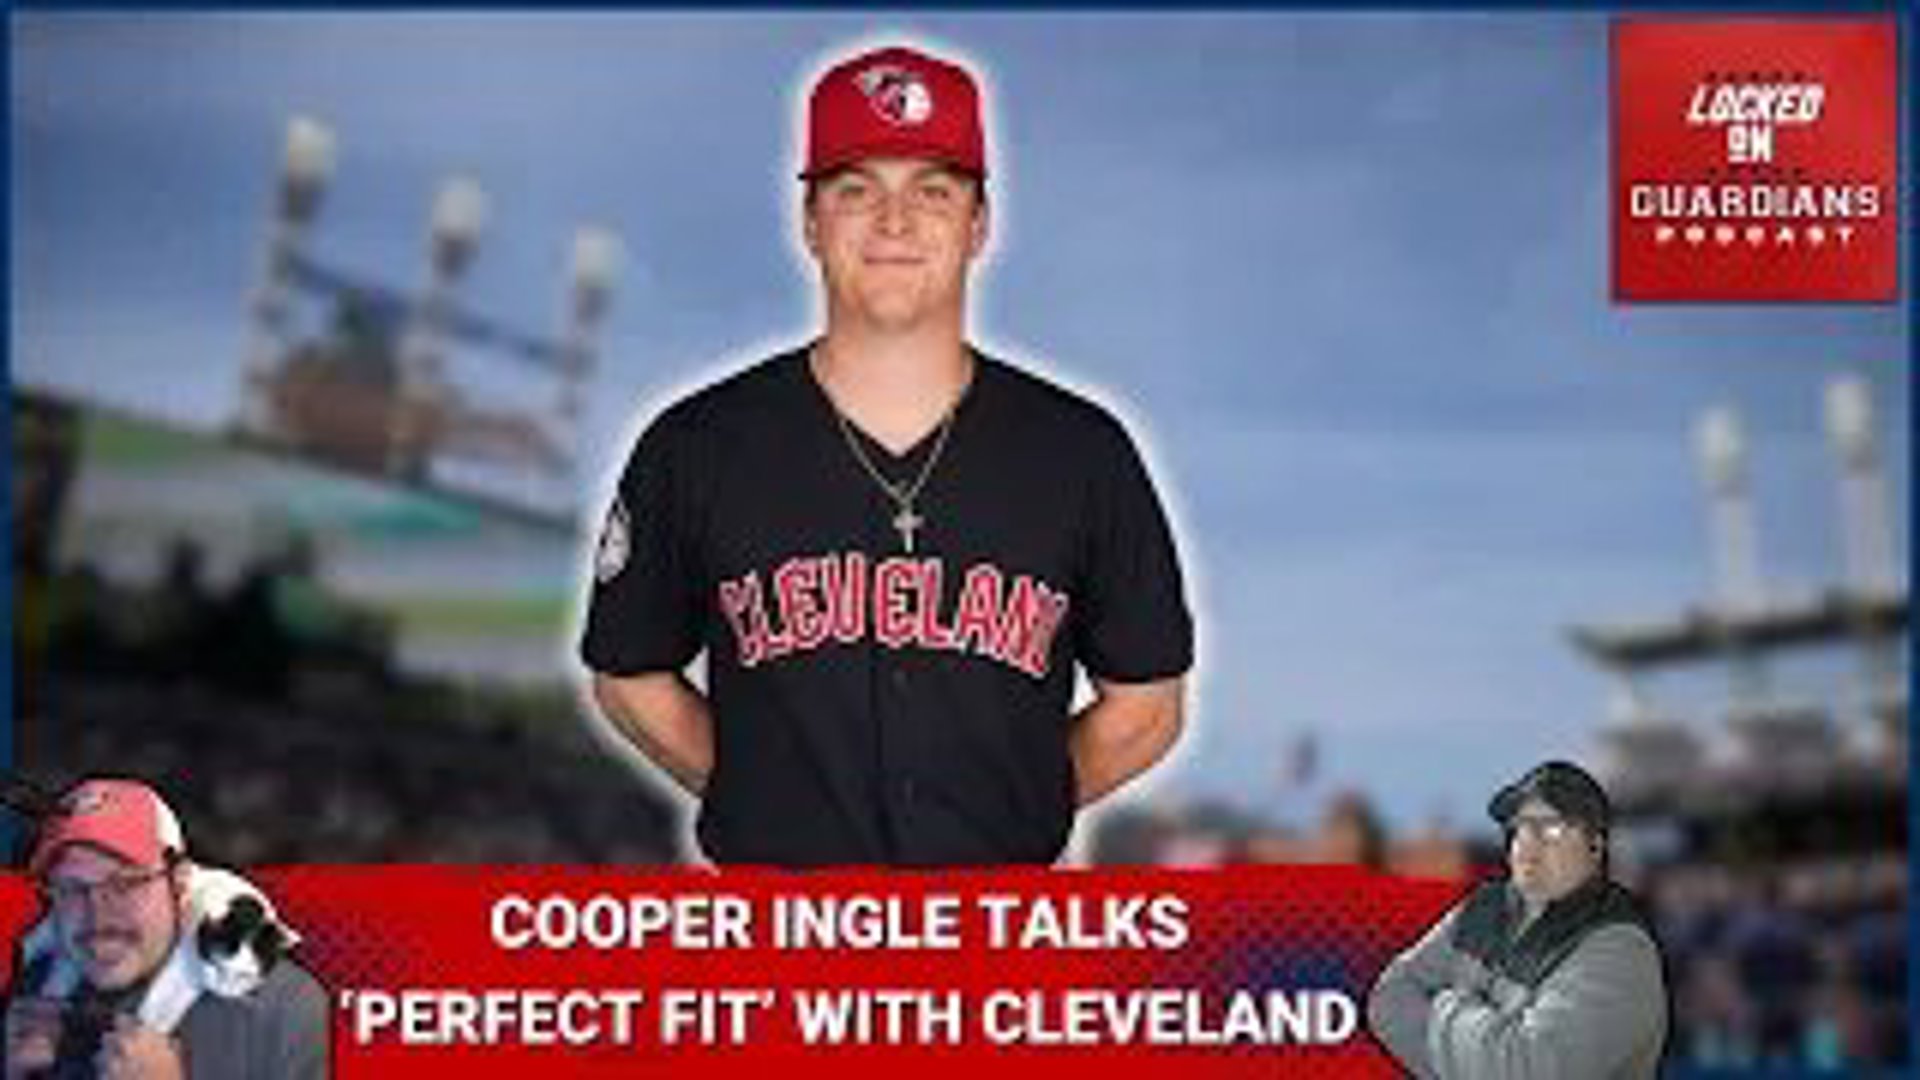 Cooper Ingle, Cleveland Guardians catching prospect, joins the show and discusses why he felt the Guardians were a good fit for him when he got drafted.